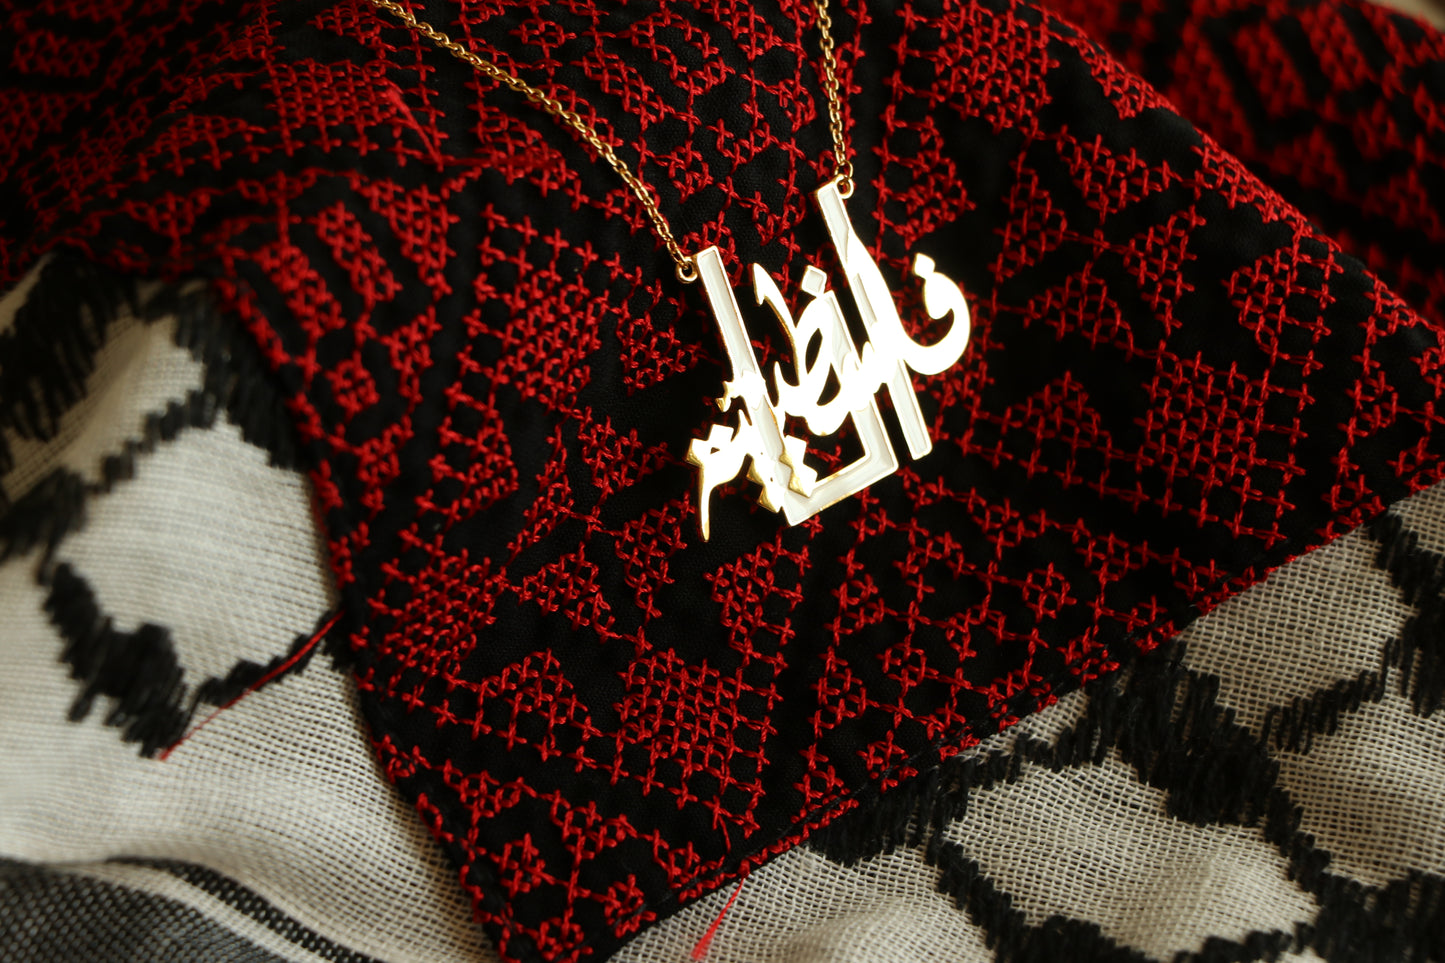 Necklace (ANA FALASTENYEH) "I am Palestinian" Word Written In Arabic Calligraphy in the GOLD & WHITE colors